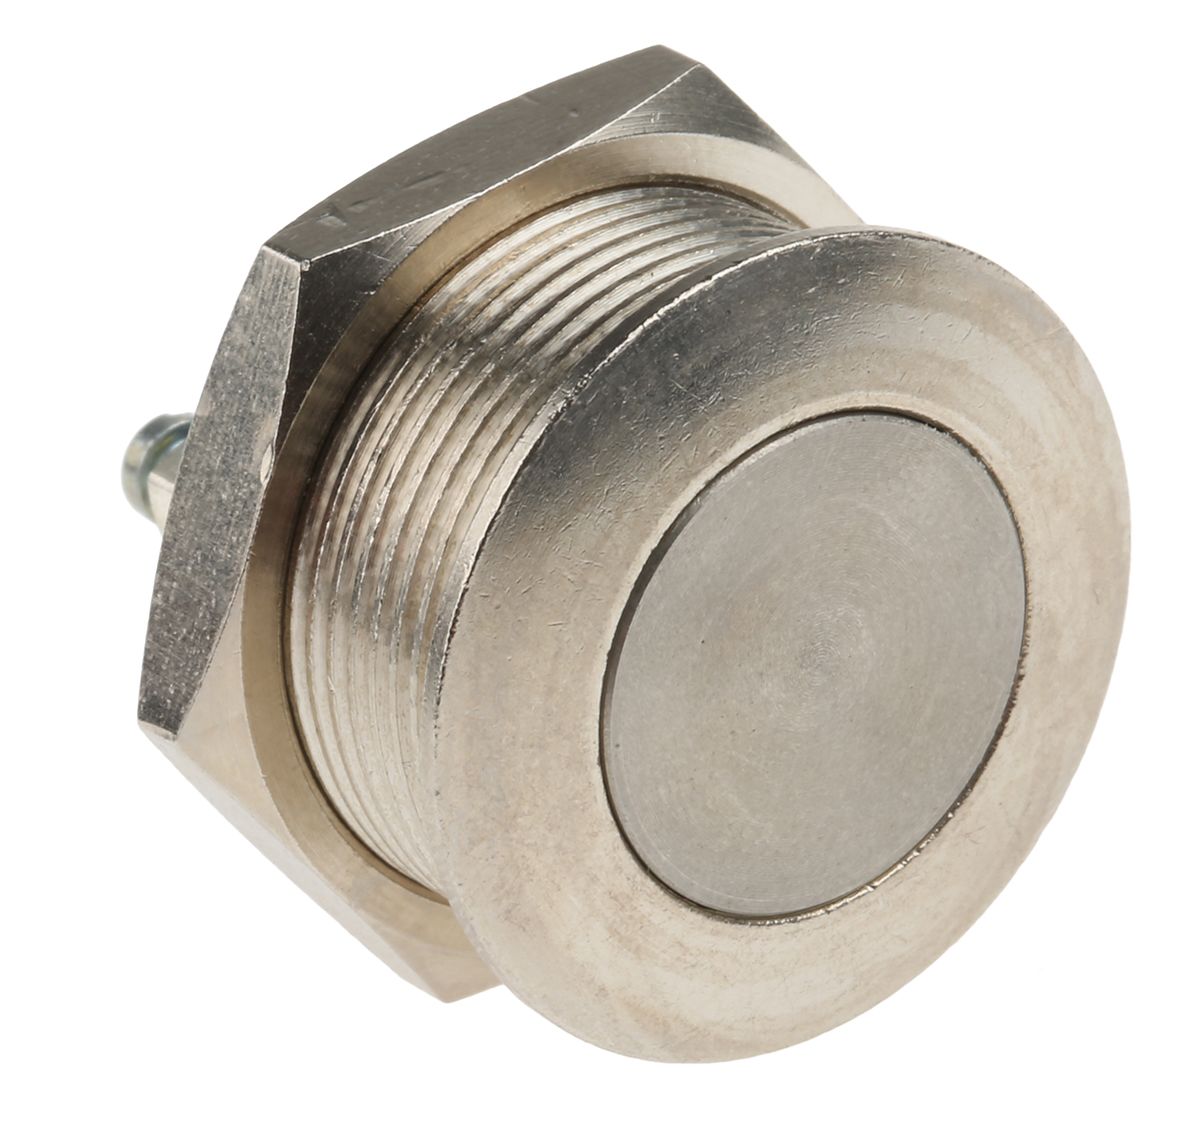 APEM Momentary Push Button Switch, Panel Mount, SPST, 22.2mm Cutout, 24/48V dc